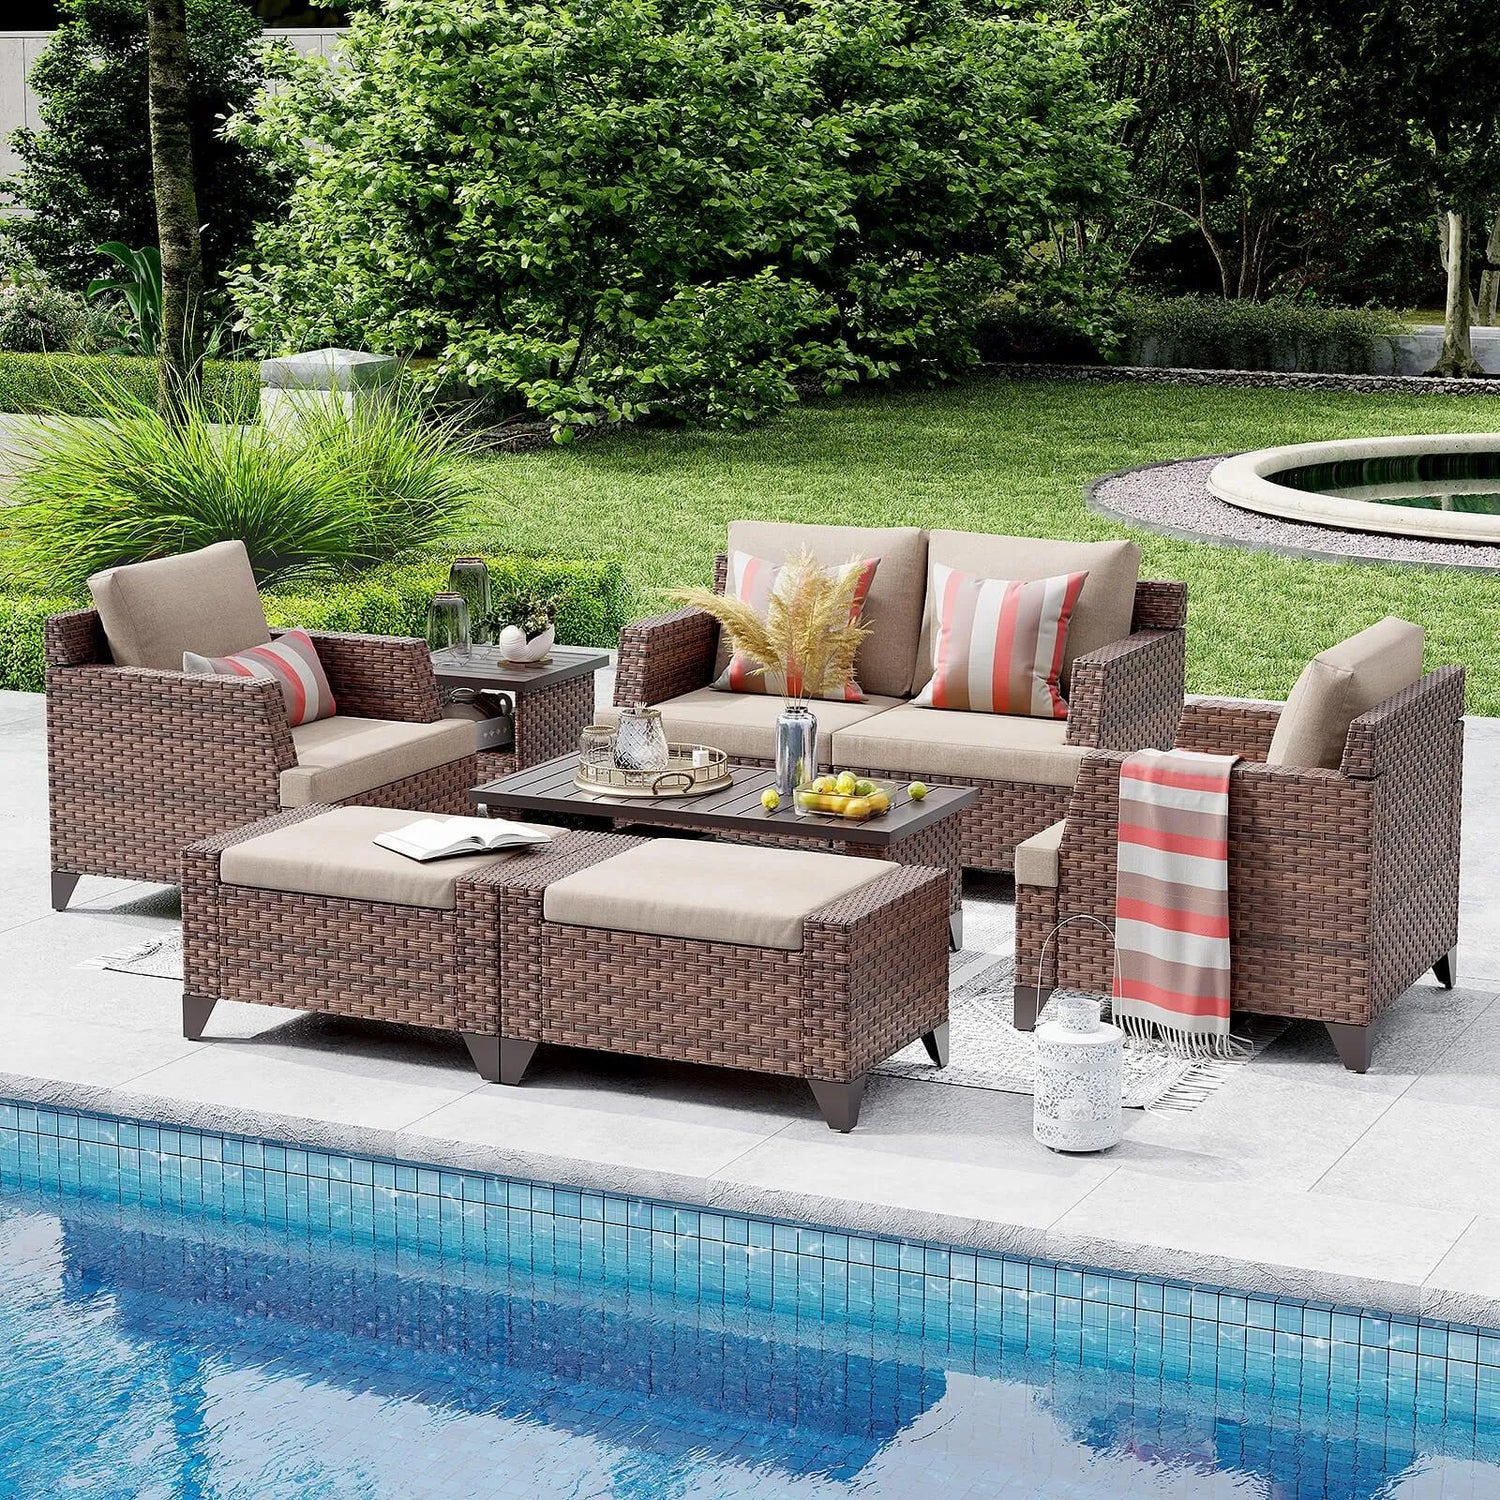 Best Materials for Outdoor Furniture Sets